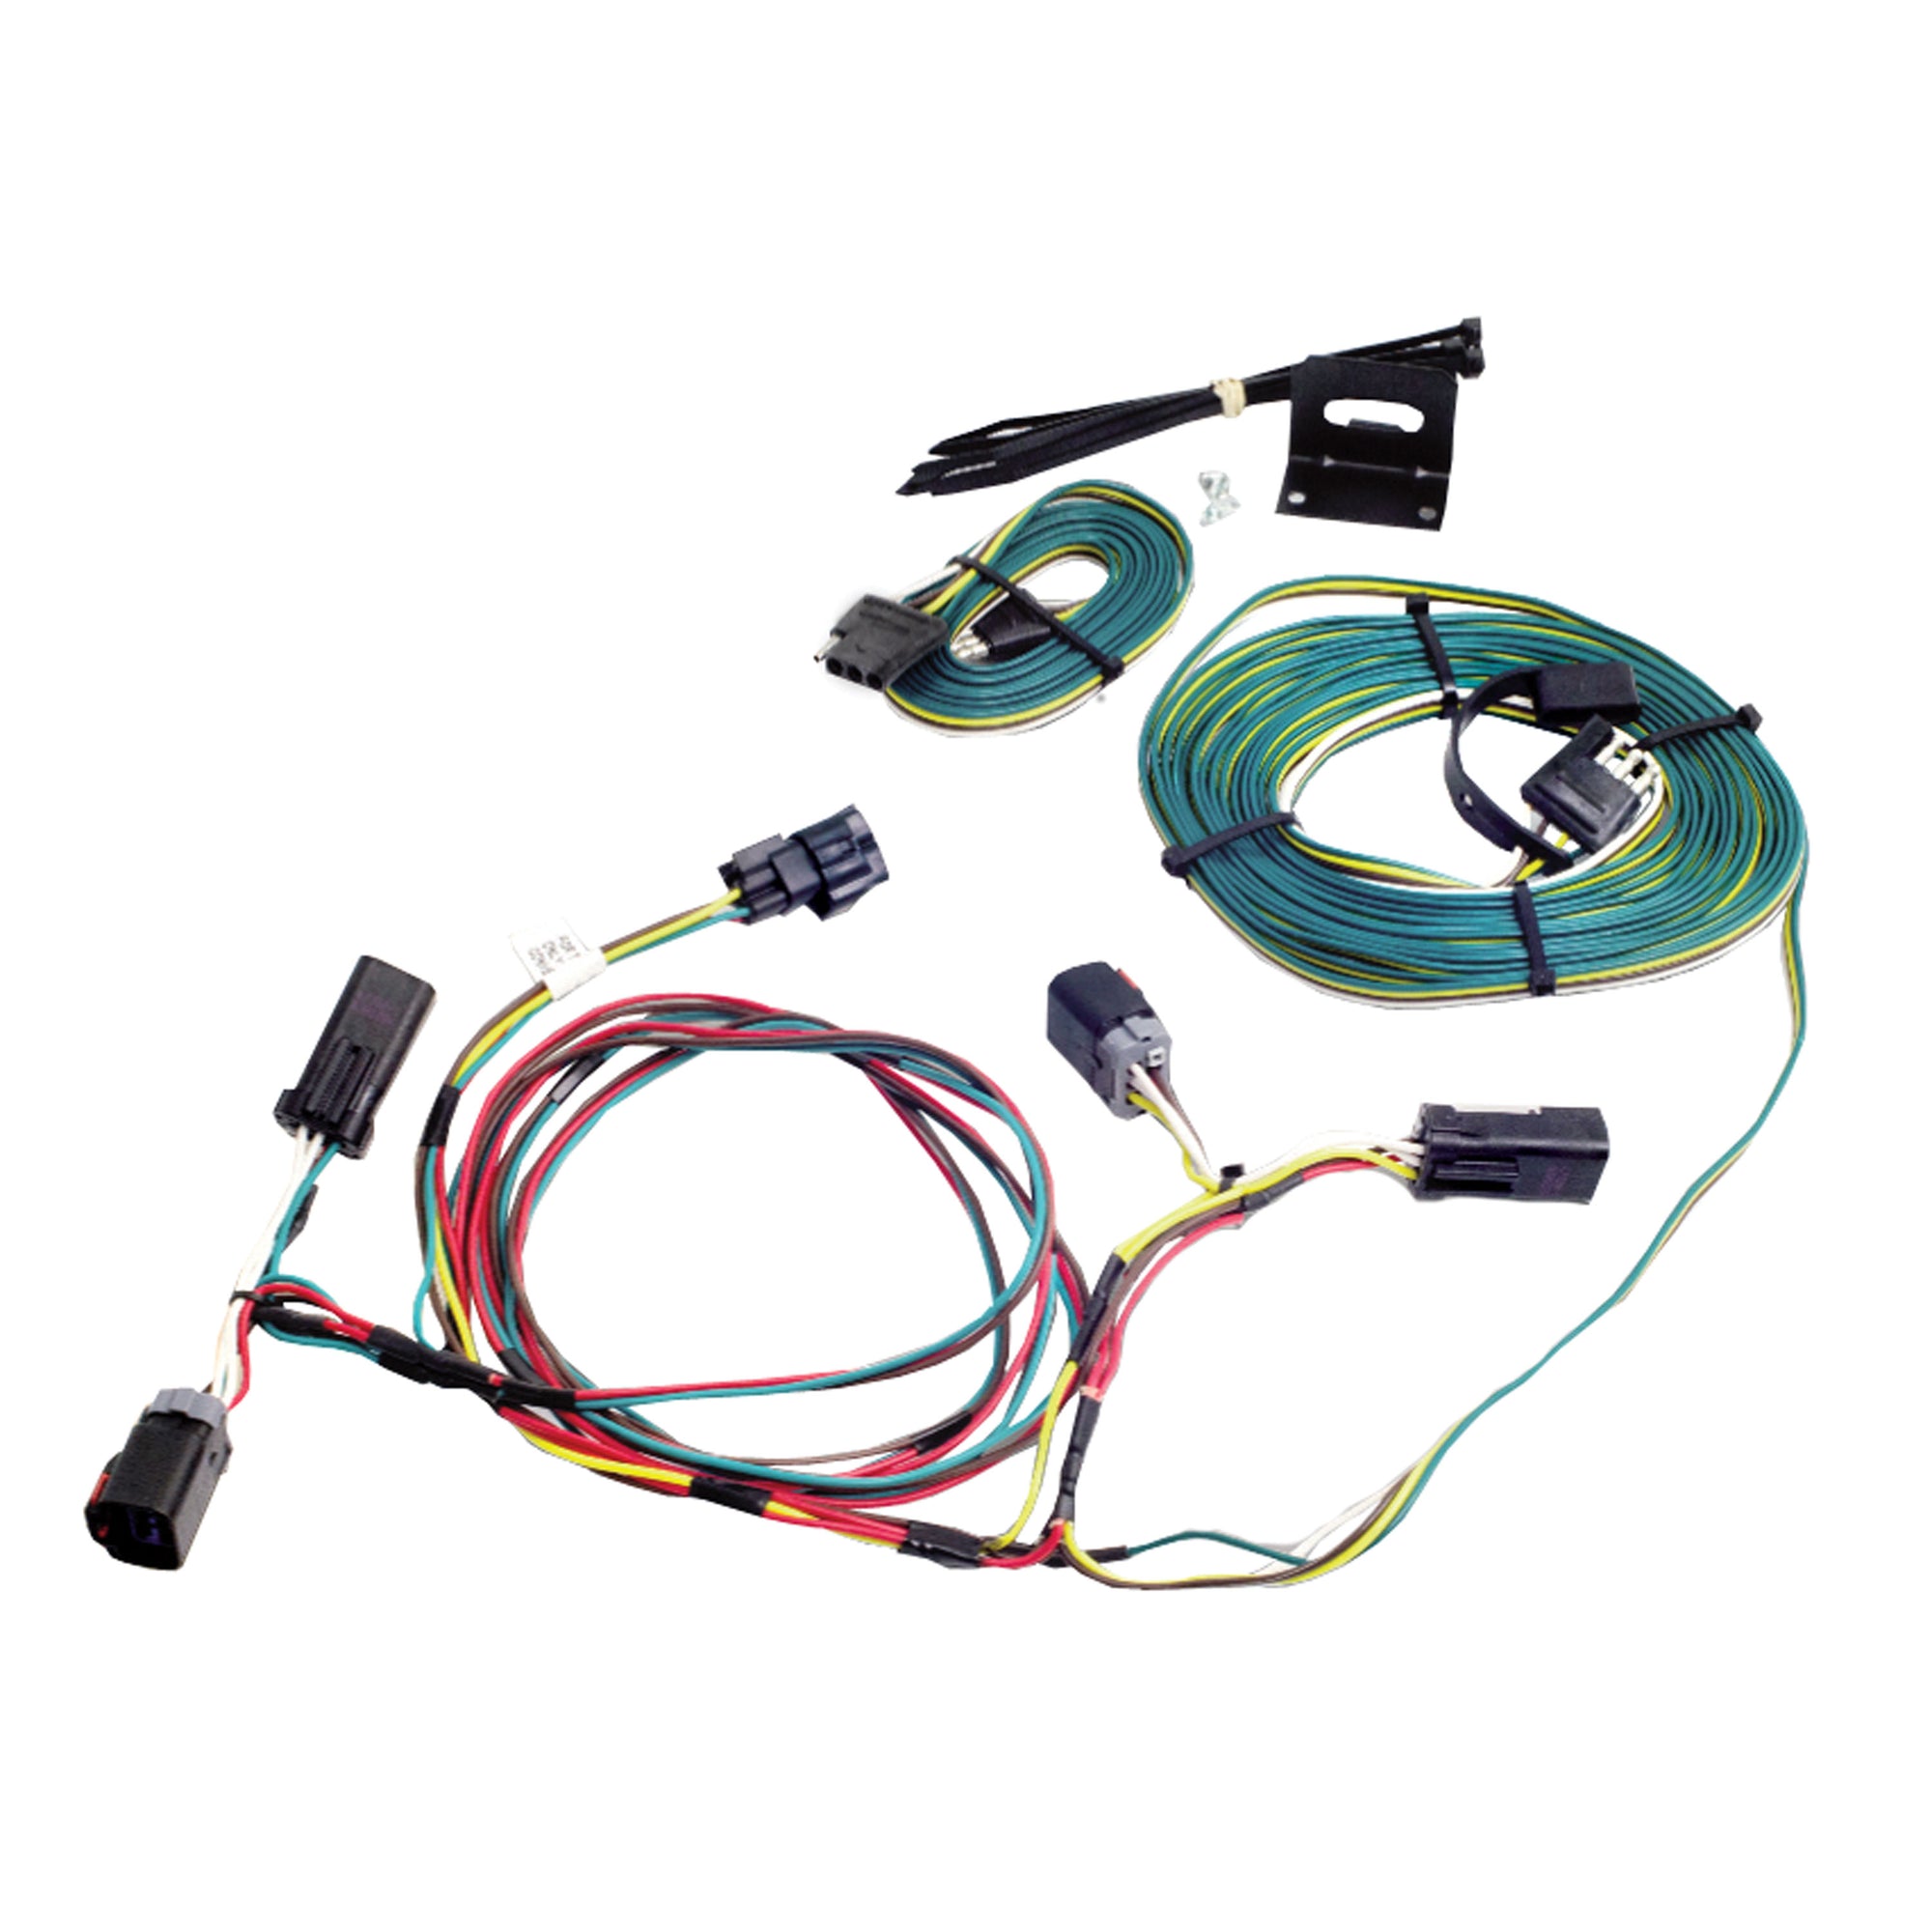 Demco 9523083 Towed Connector Vehicle Wiring Kit - For GMC Acadia '07-'12